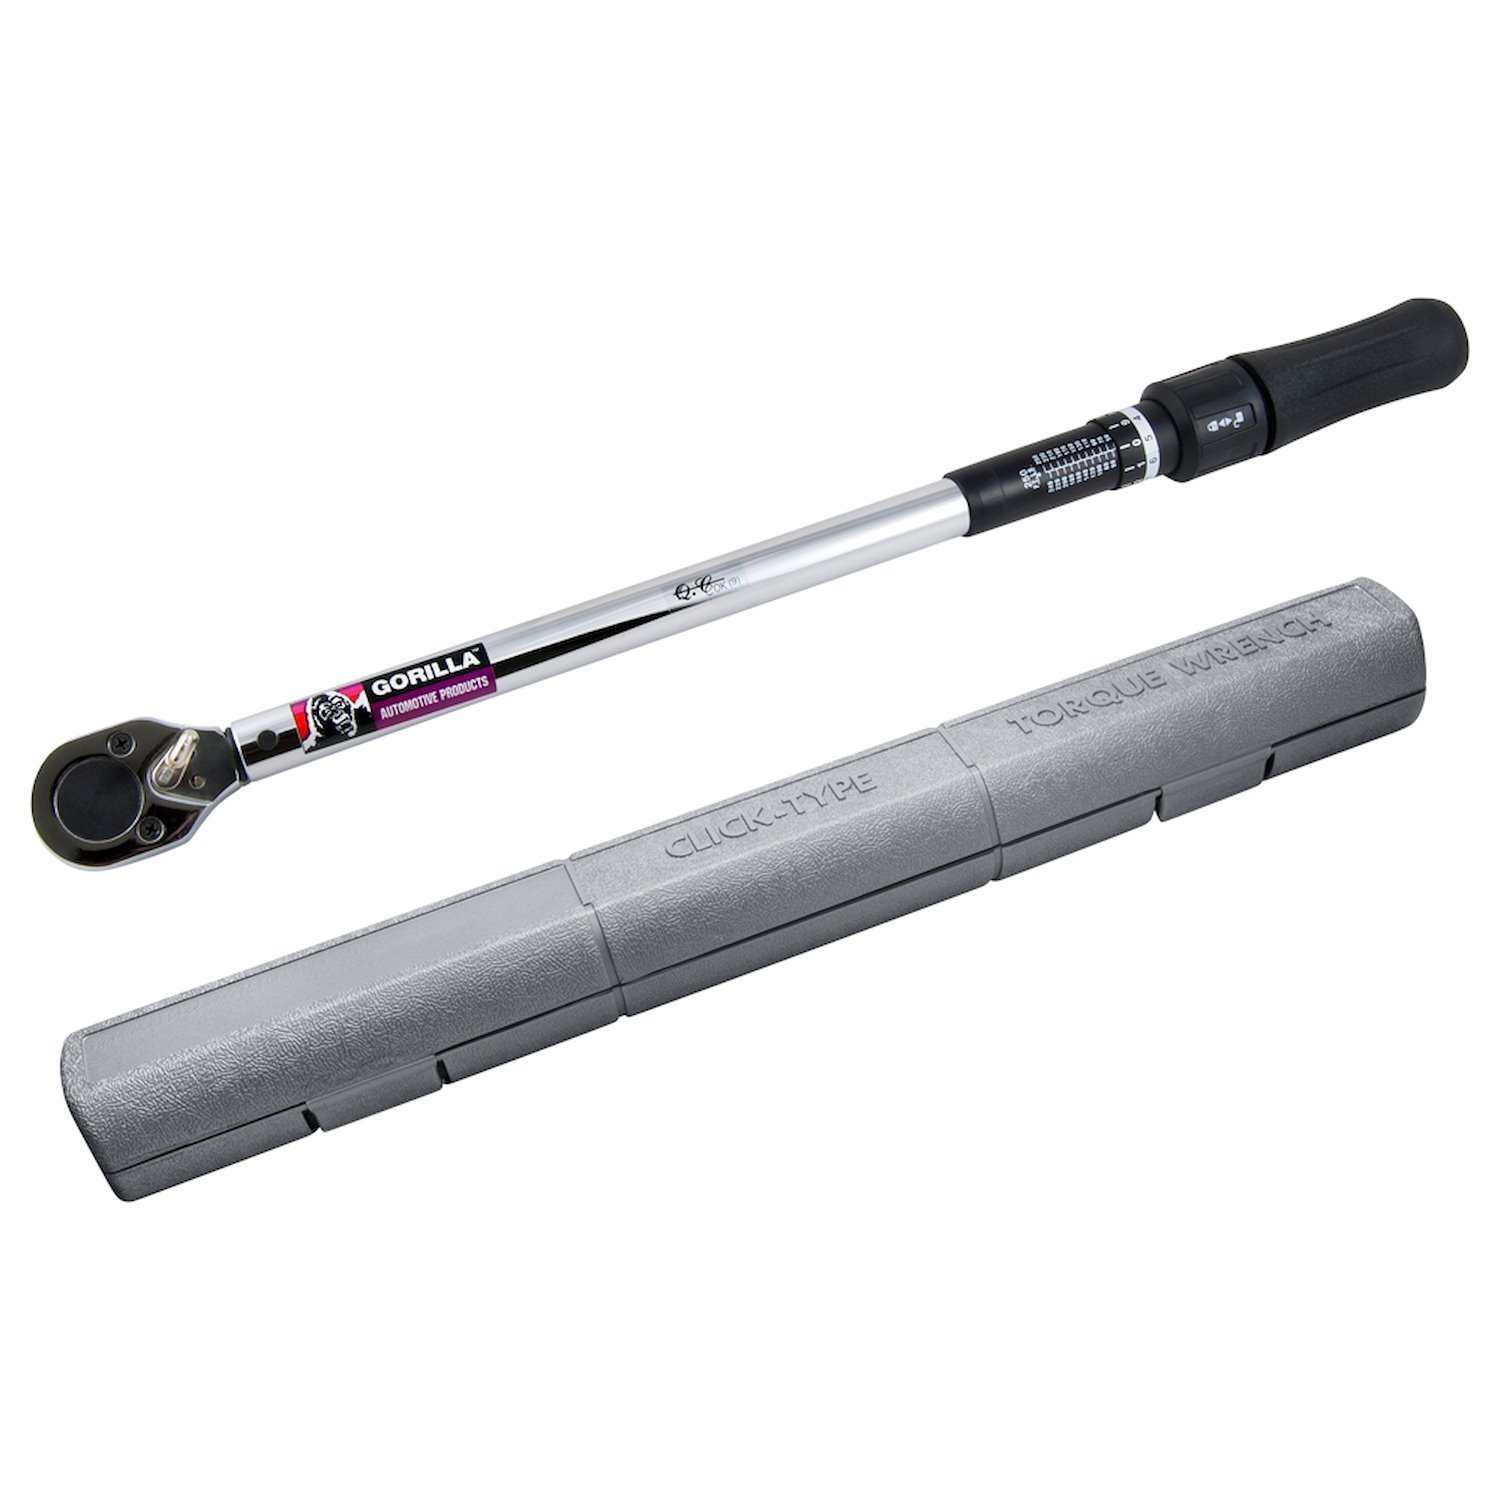 TW705 Torque Wrench, 50-250 Ft/Lbs.